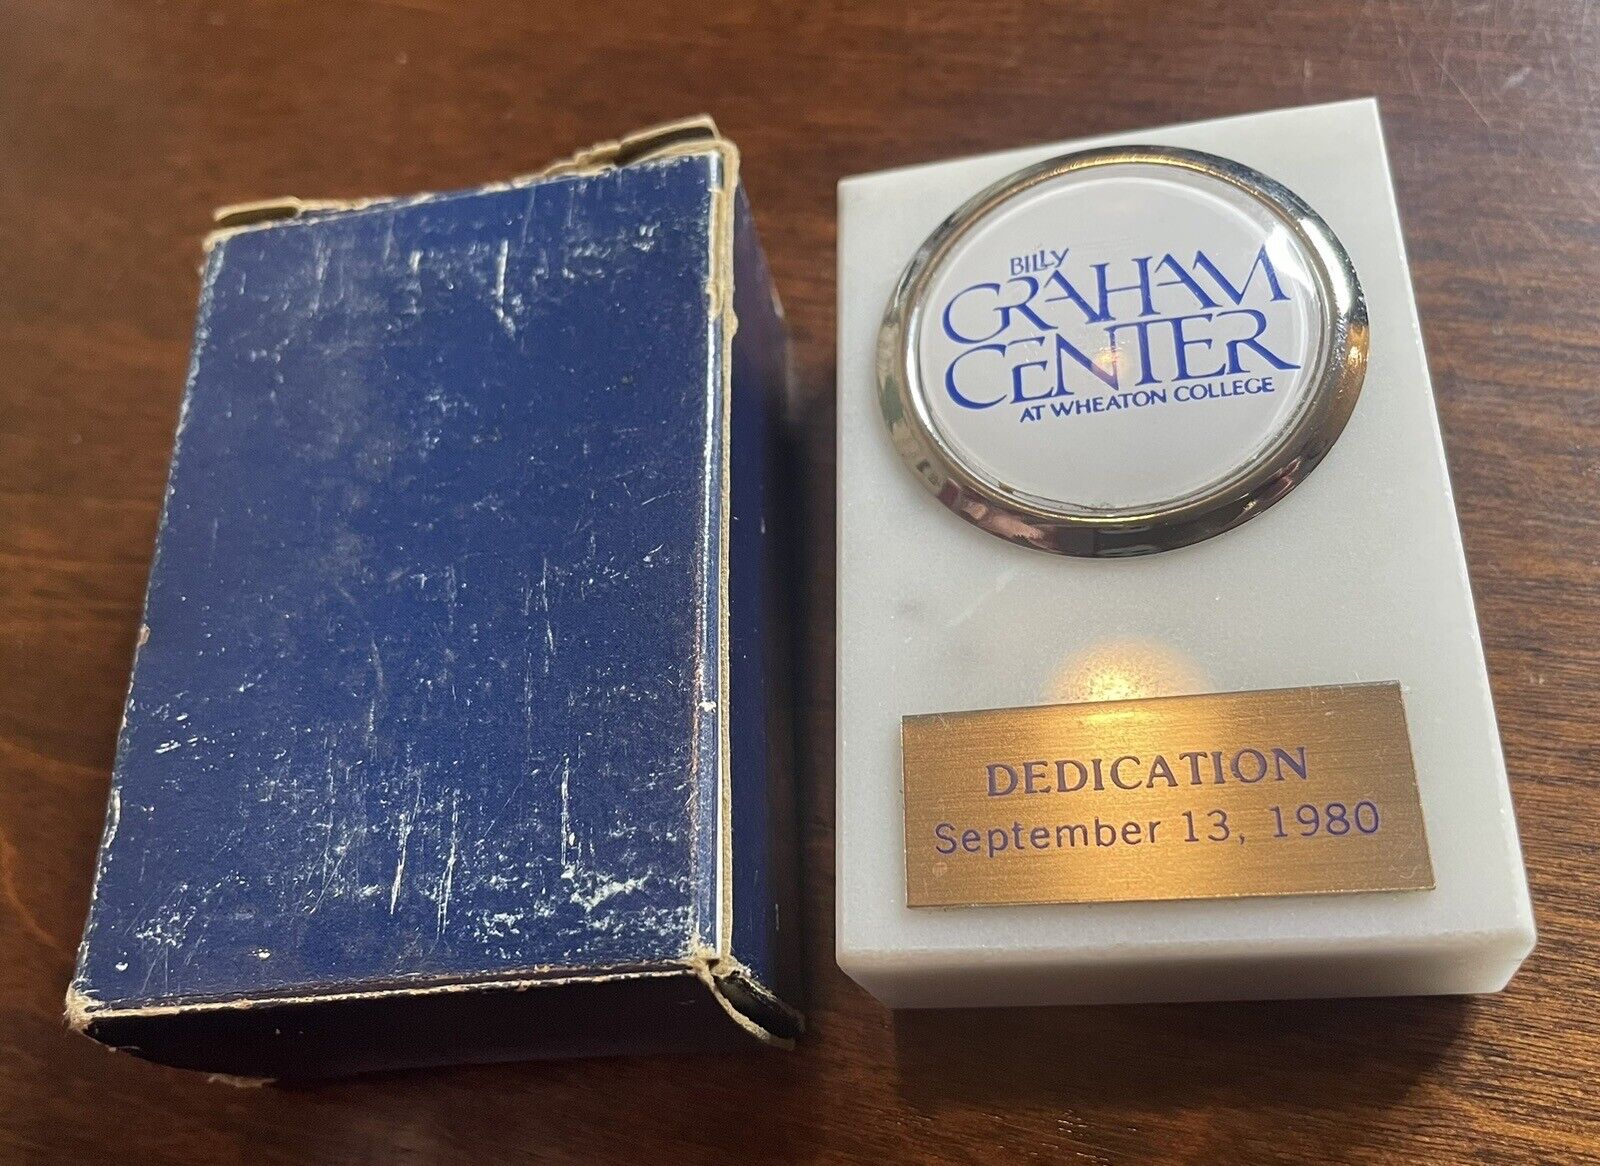 Billy Graham Center At Wheaton College Paperweight 1980 ITALIAN MADE